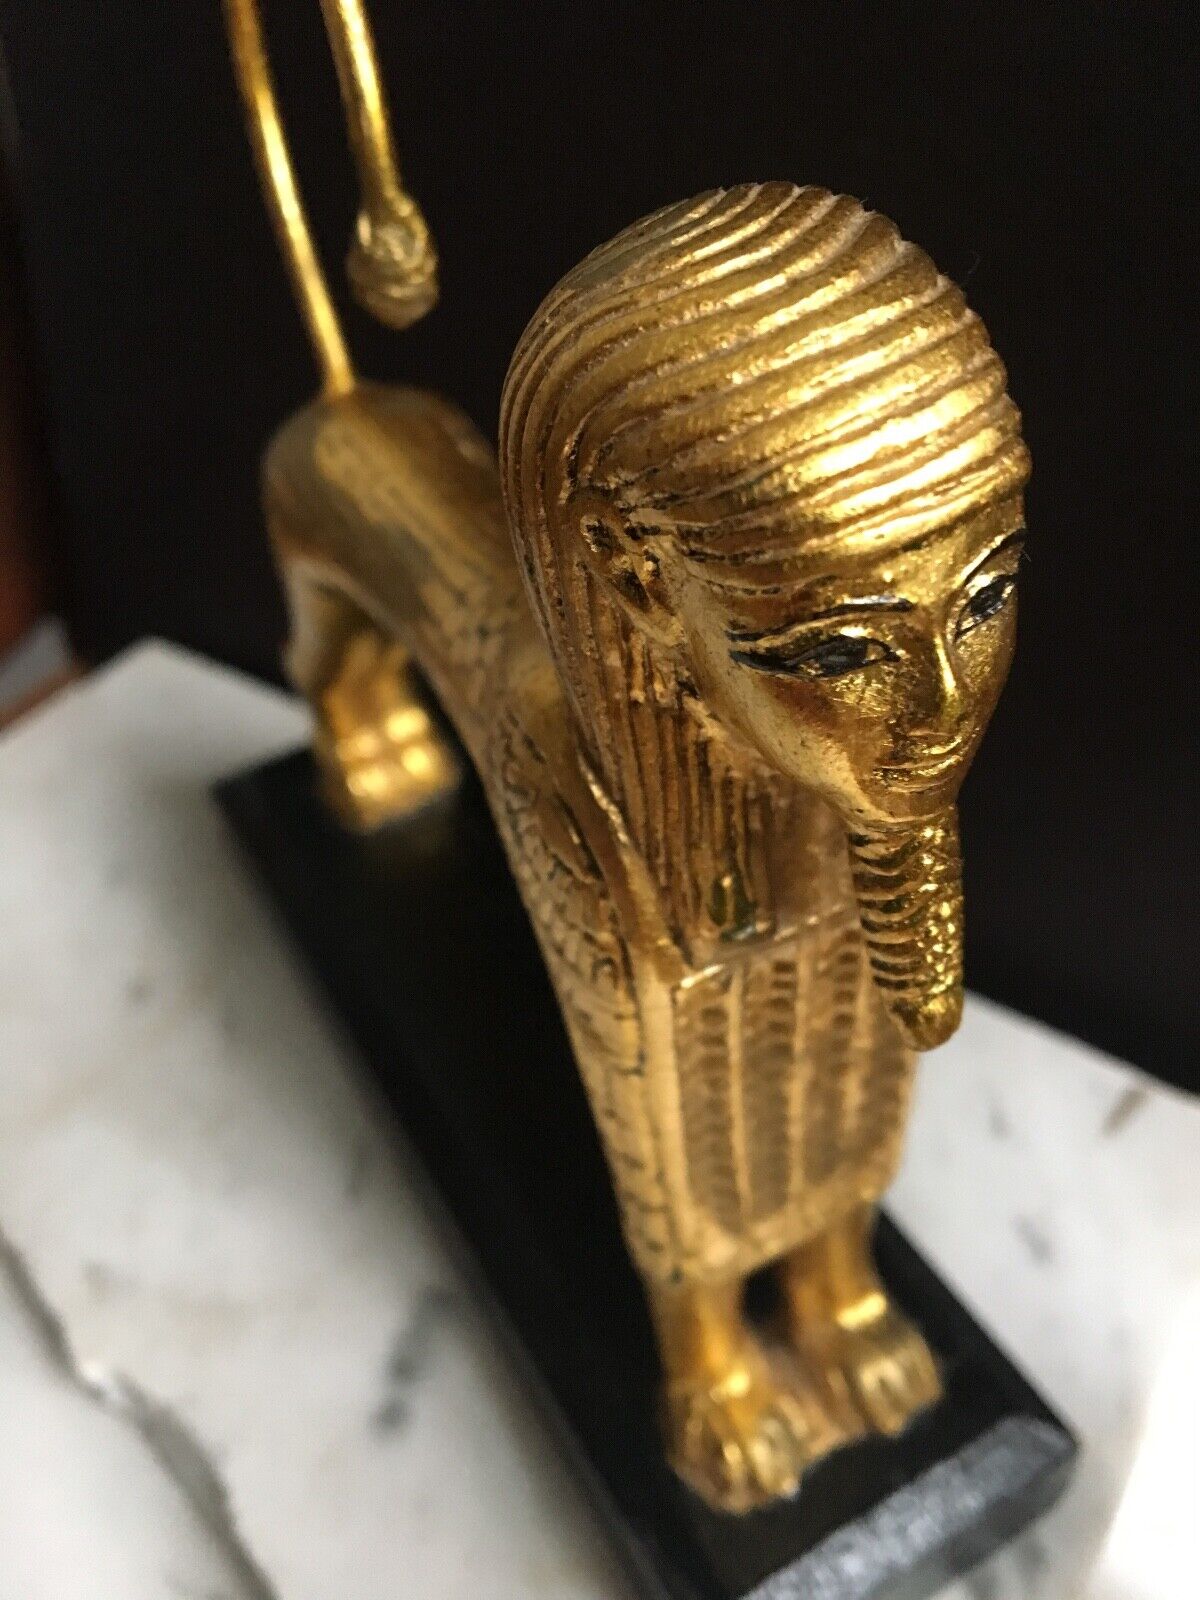 Egyptian composite figure: Pharoah? with lions body..gold painted..on base 